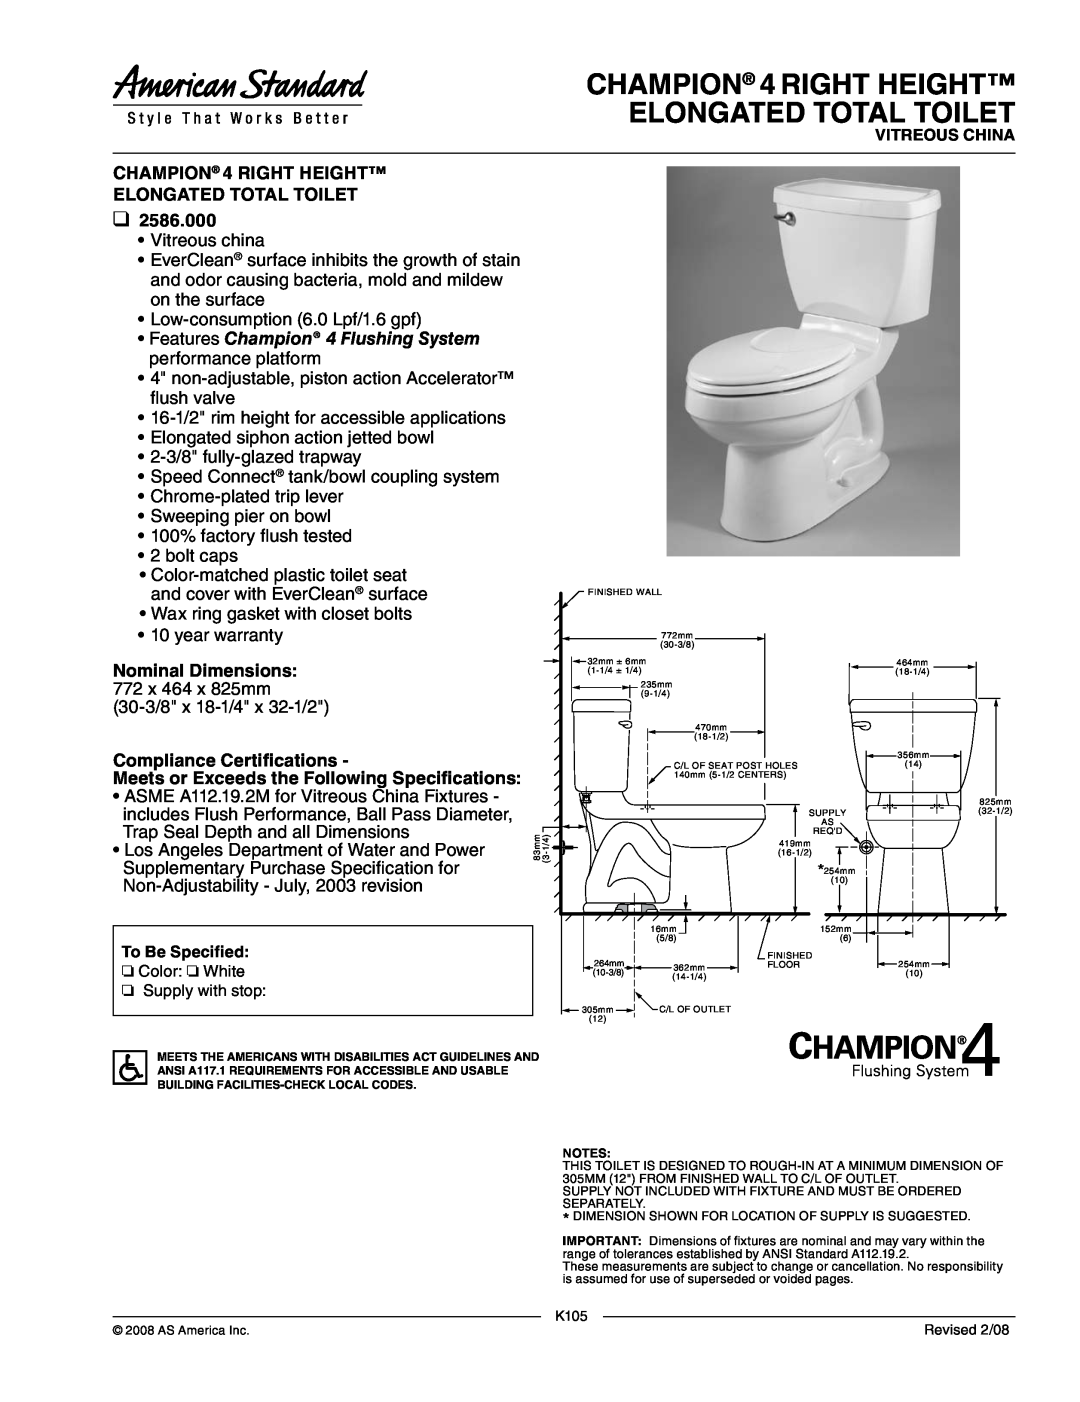 American Standard 2586.000 dimensions CHAMPION 4 RIGHT HEIGHT ELONGATED TOTAL TOILET, Nominal Dimensions 